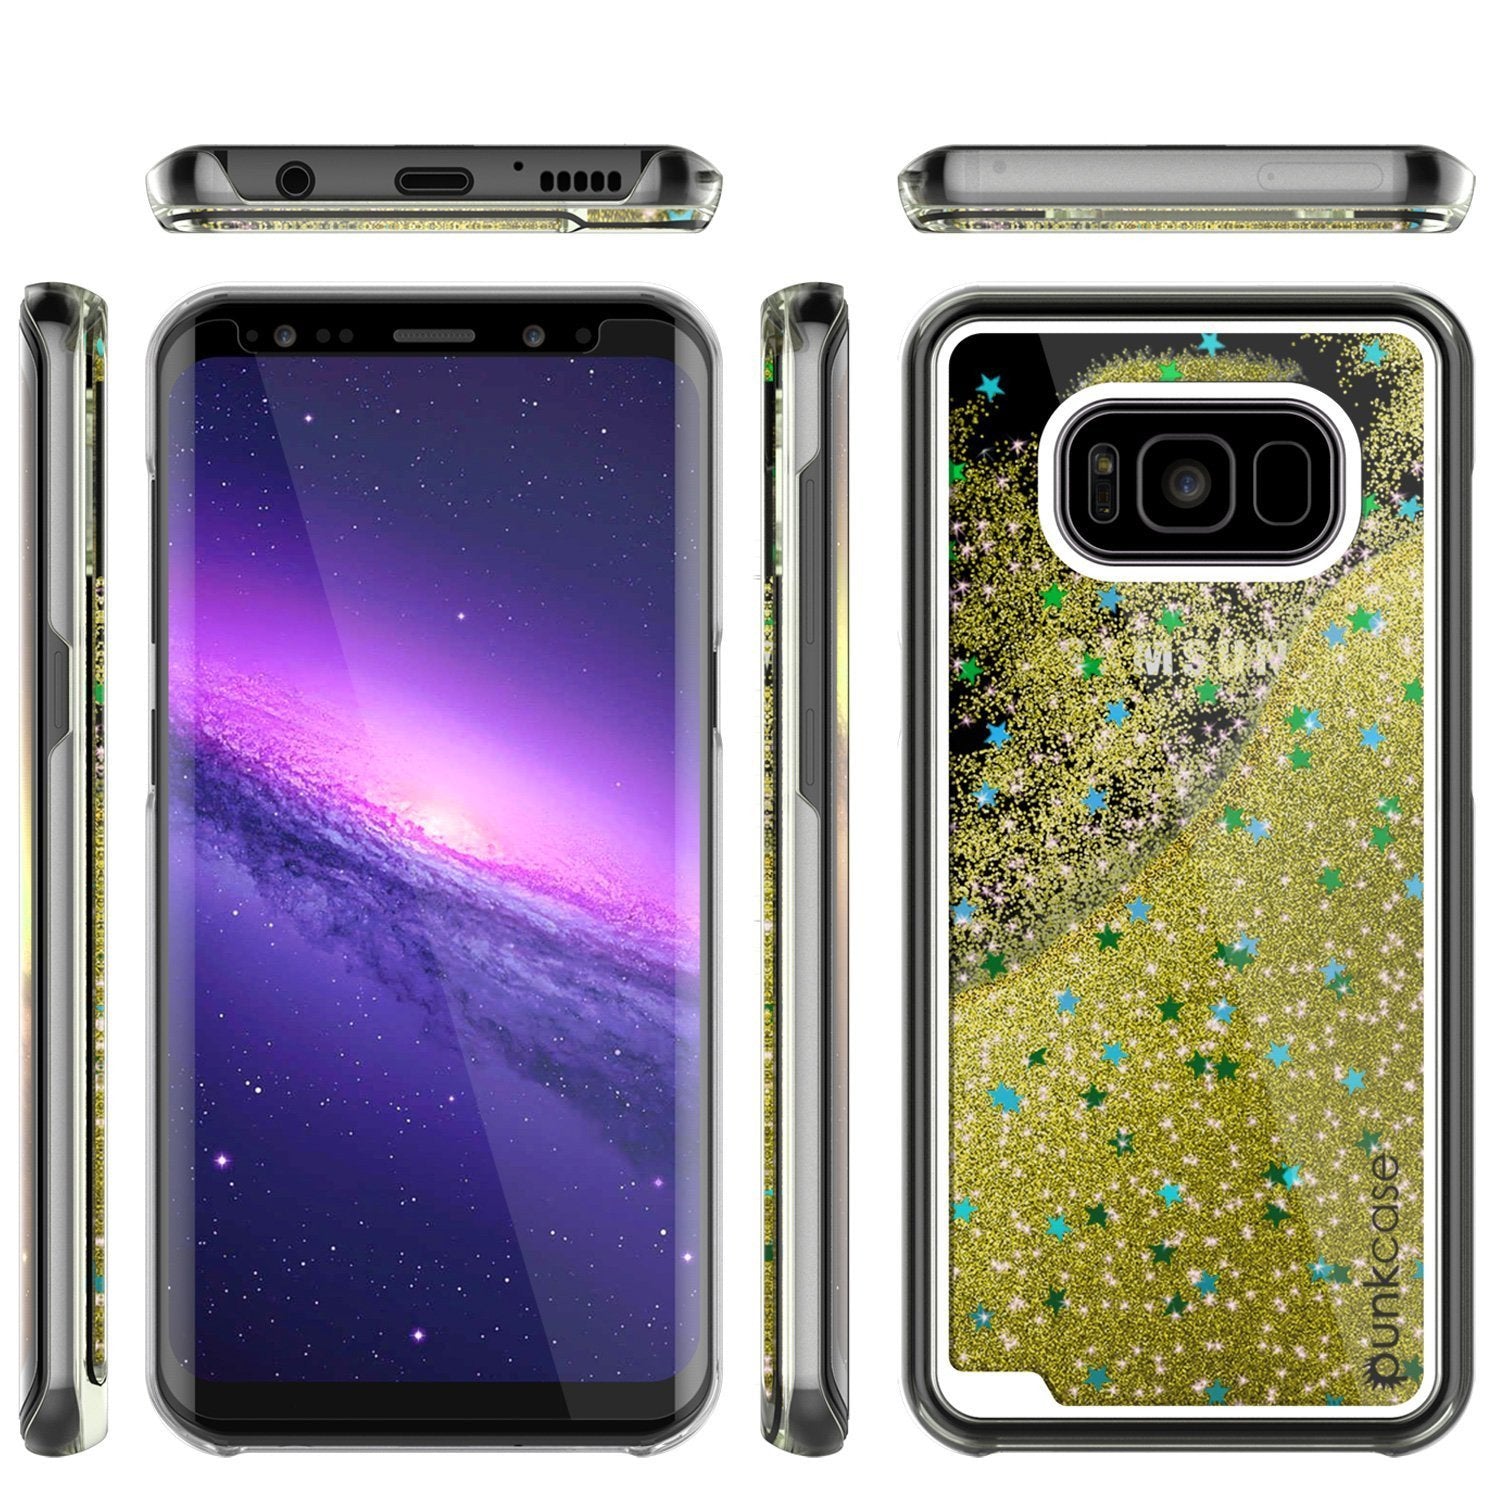 S8 Plus Case, Punkcase Liquid Gold Series Protective Dual Layer Floating Glitter Cover